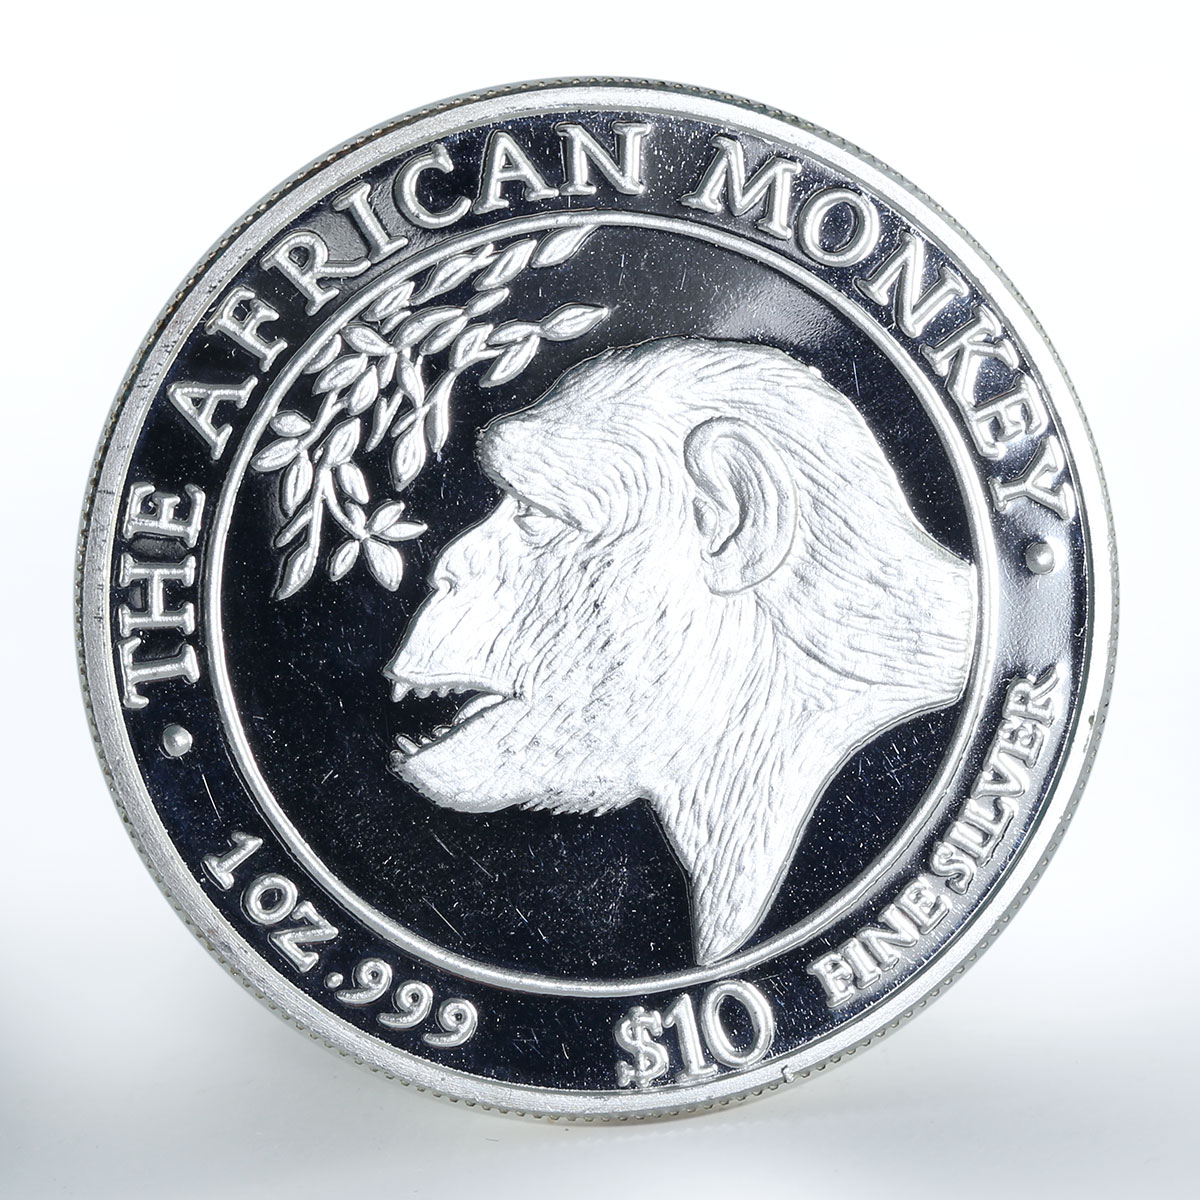 Somalia 10 dollars The African Monkey proof silver coin 1998